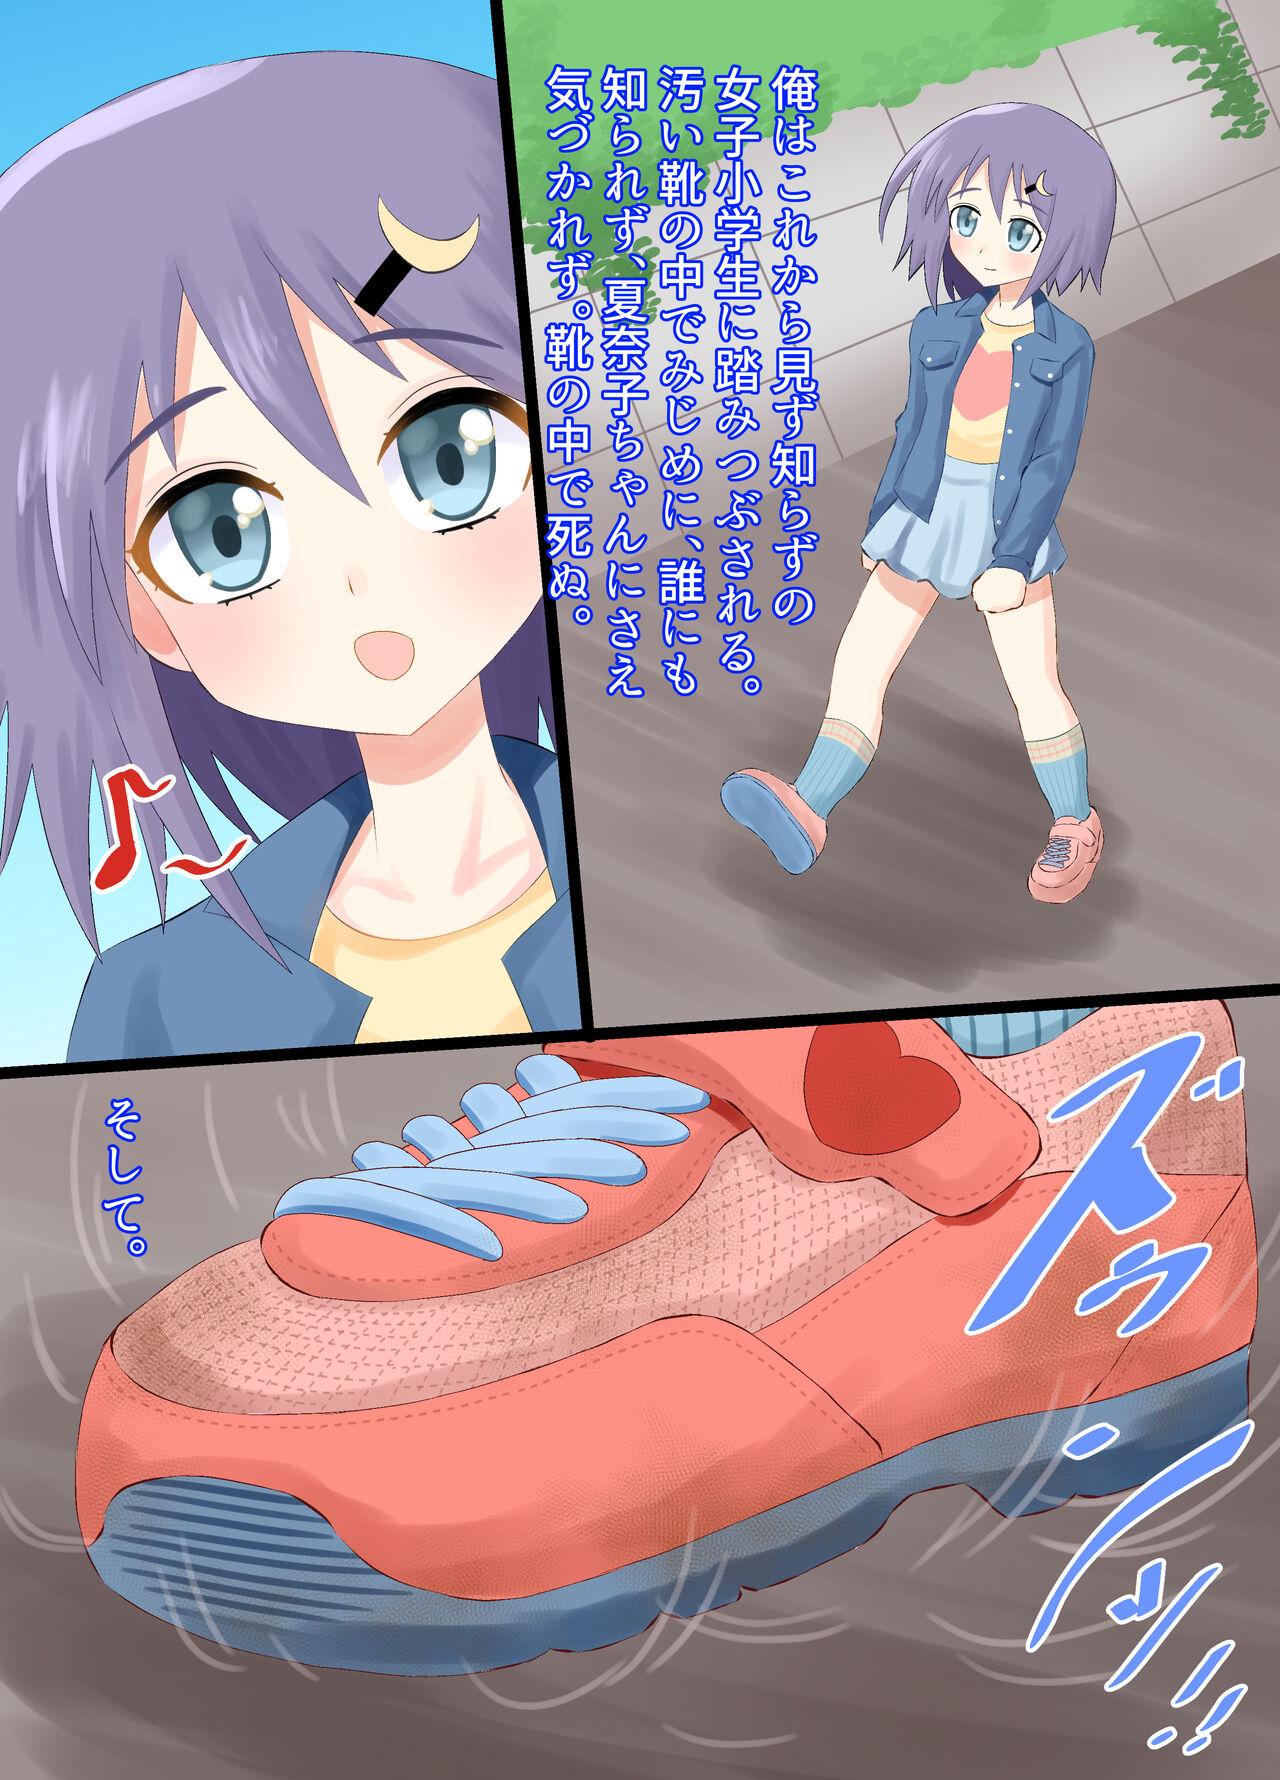 A CG collection of getting smaller and being stepped on by a girl 37